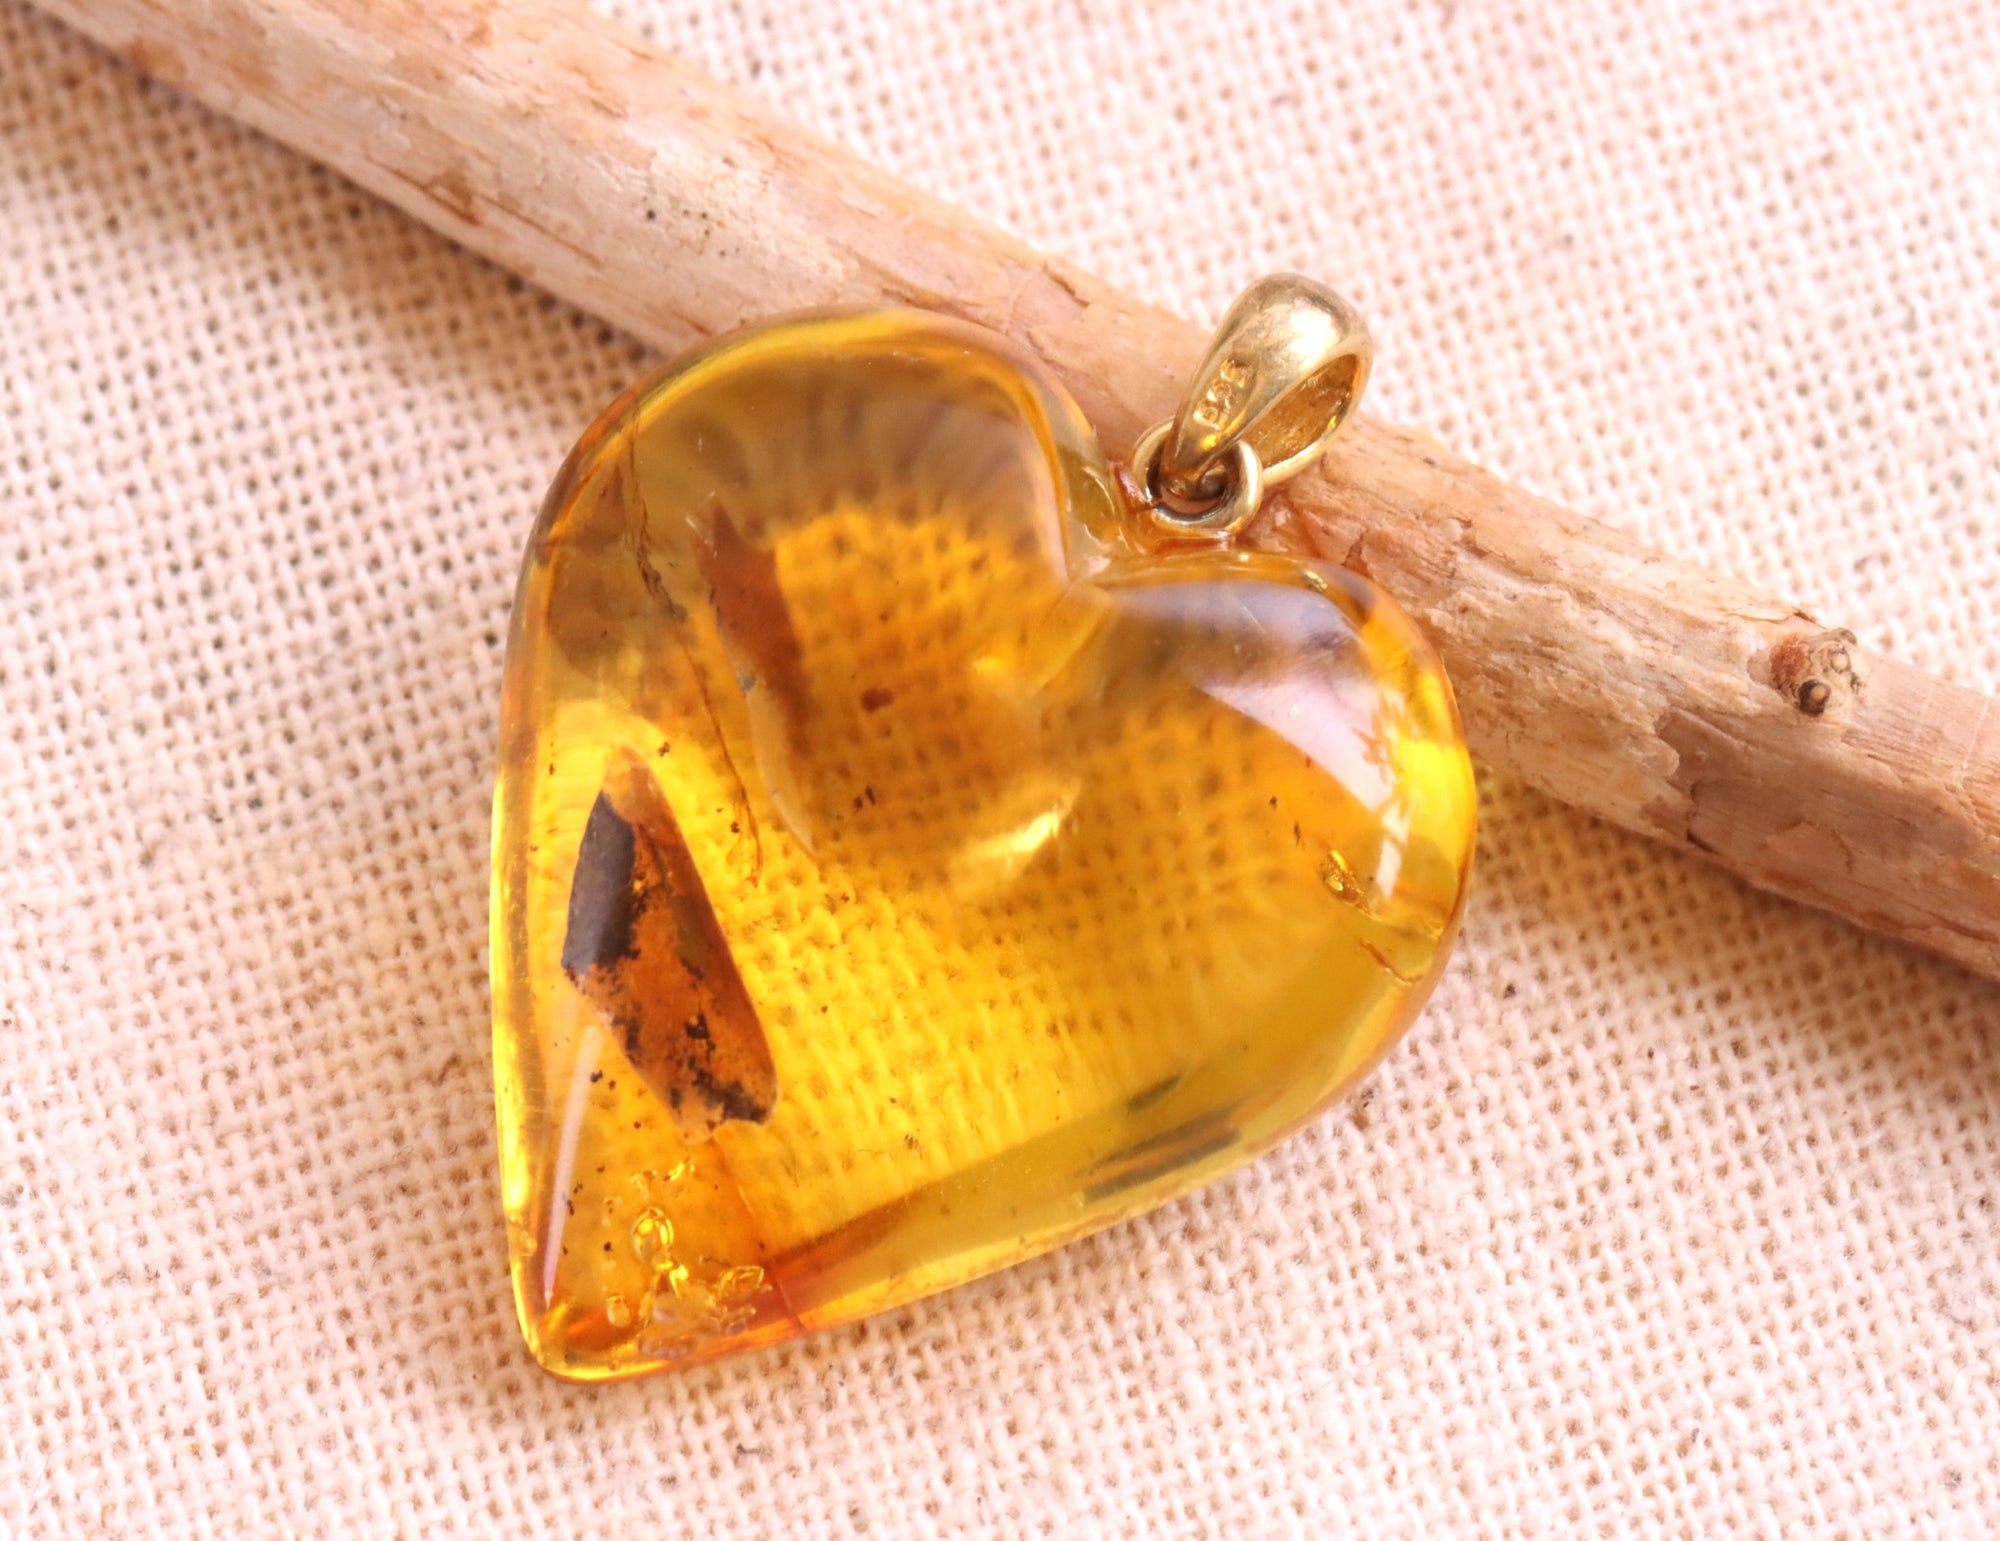 Exclusive Gold plated Silver Baltic Amber Heart Pendant